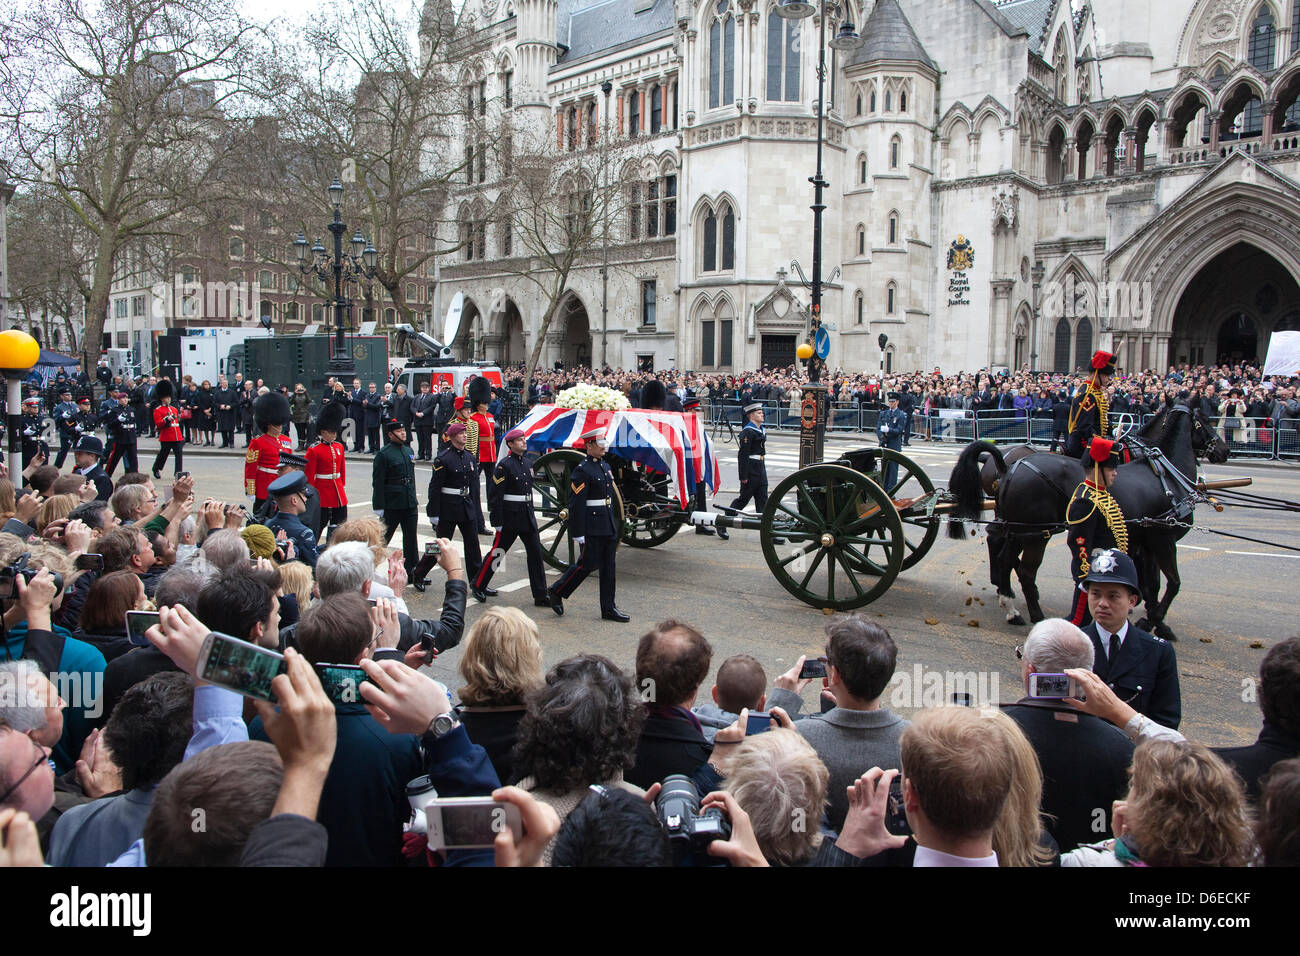 London, UK. 17th April 2013. The Ceremonial Funeral Of Former British Prime Minister Baroness Thatcher, London, UK.  Crowds line up to watch the Ceremonial Funeral of Baroness Thatcher pass along Fleet Street, London, UK. Credit: Jeff Gilbert/Alamy Live News Stock Photo